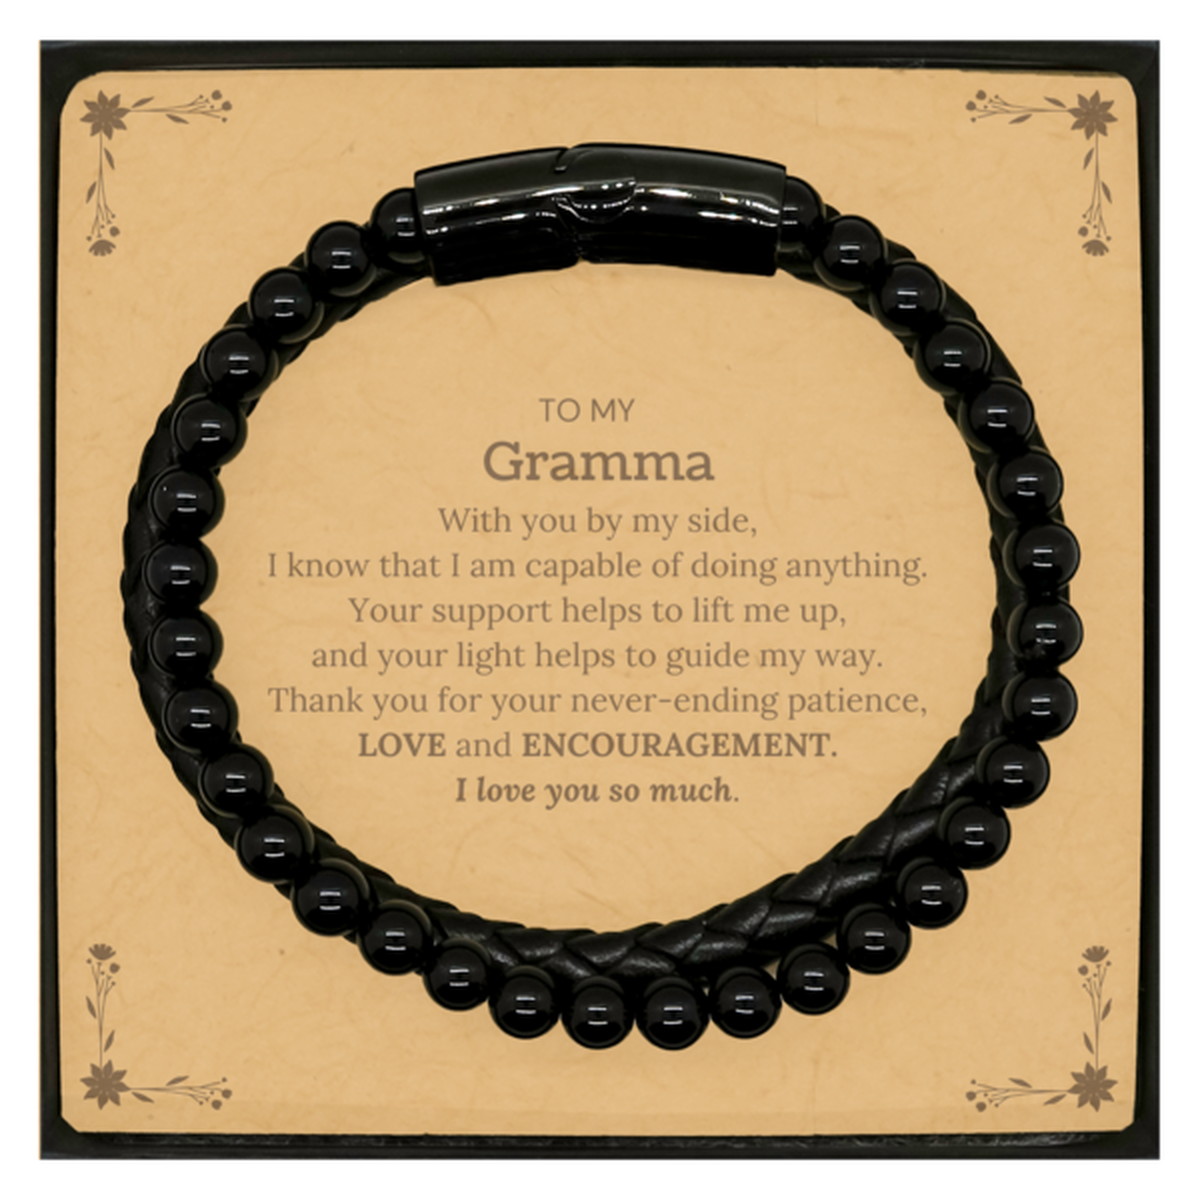 Appreciation Gramma Stone Leather Bracelets Gifts, To My Gramma Birthday Christmas Wedding Keepsake Gifts for Gramma With you by my side, I know that I am capable of doing anything. I love you so much